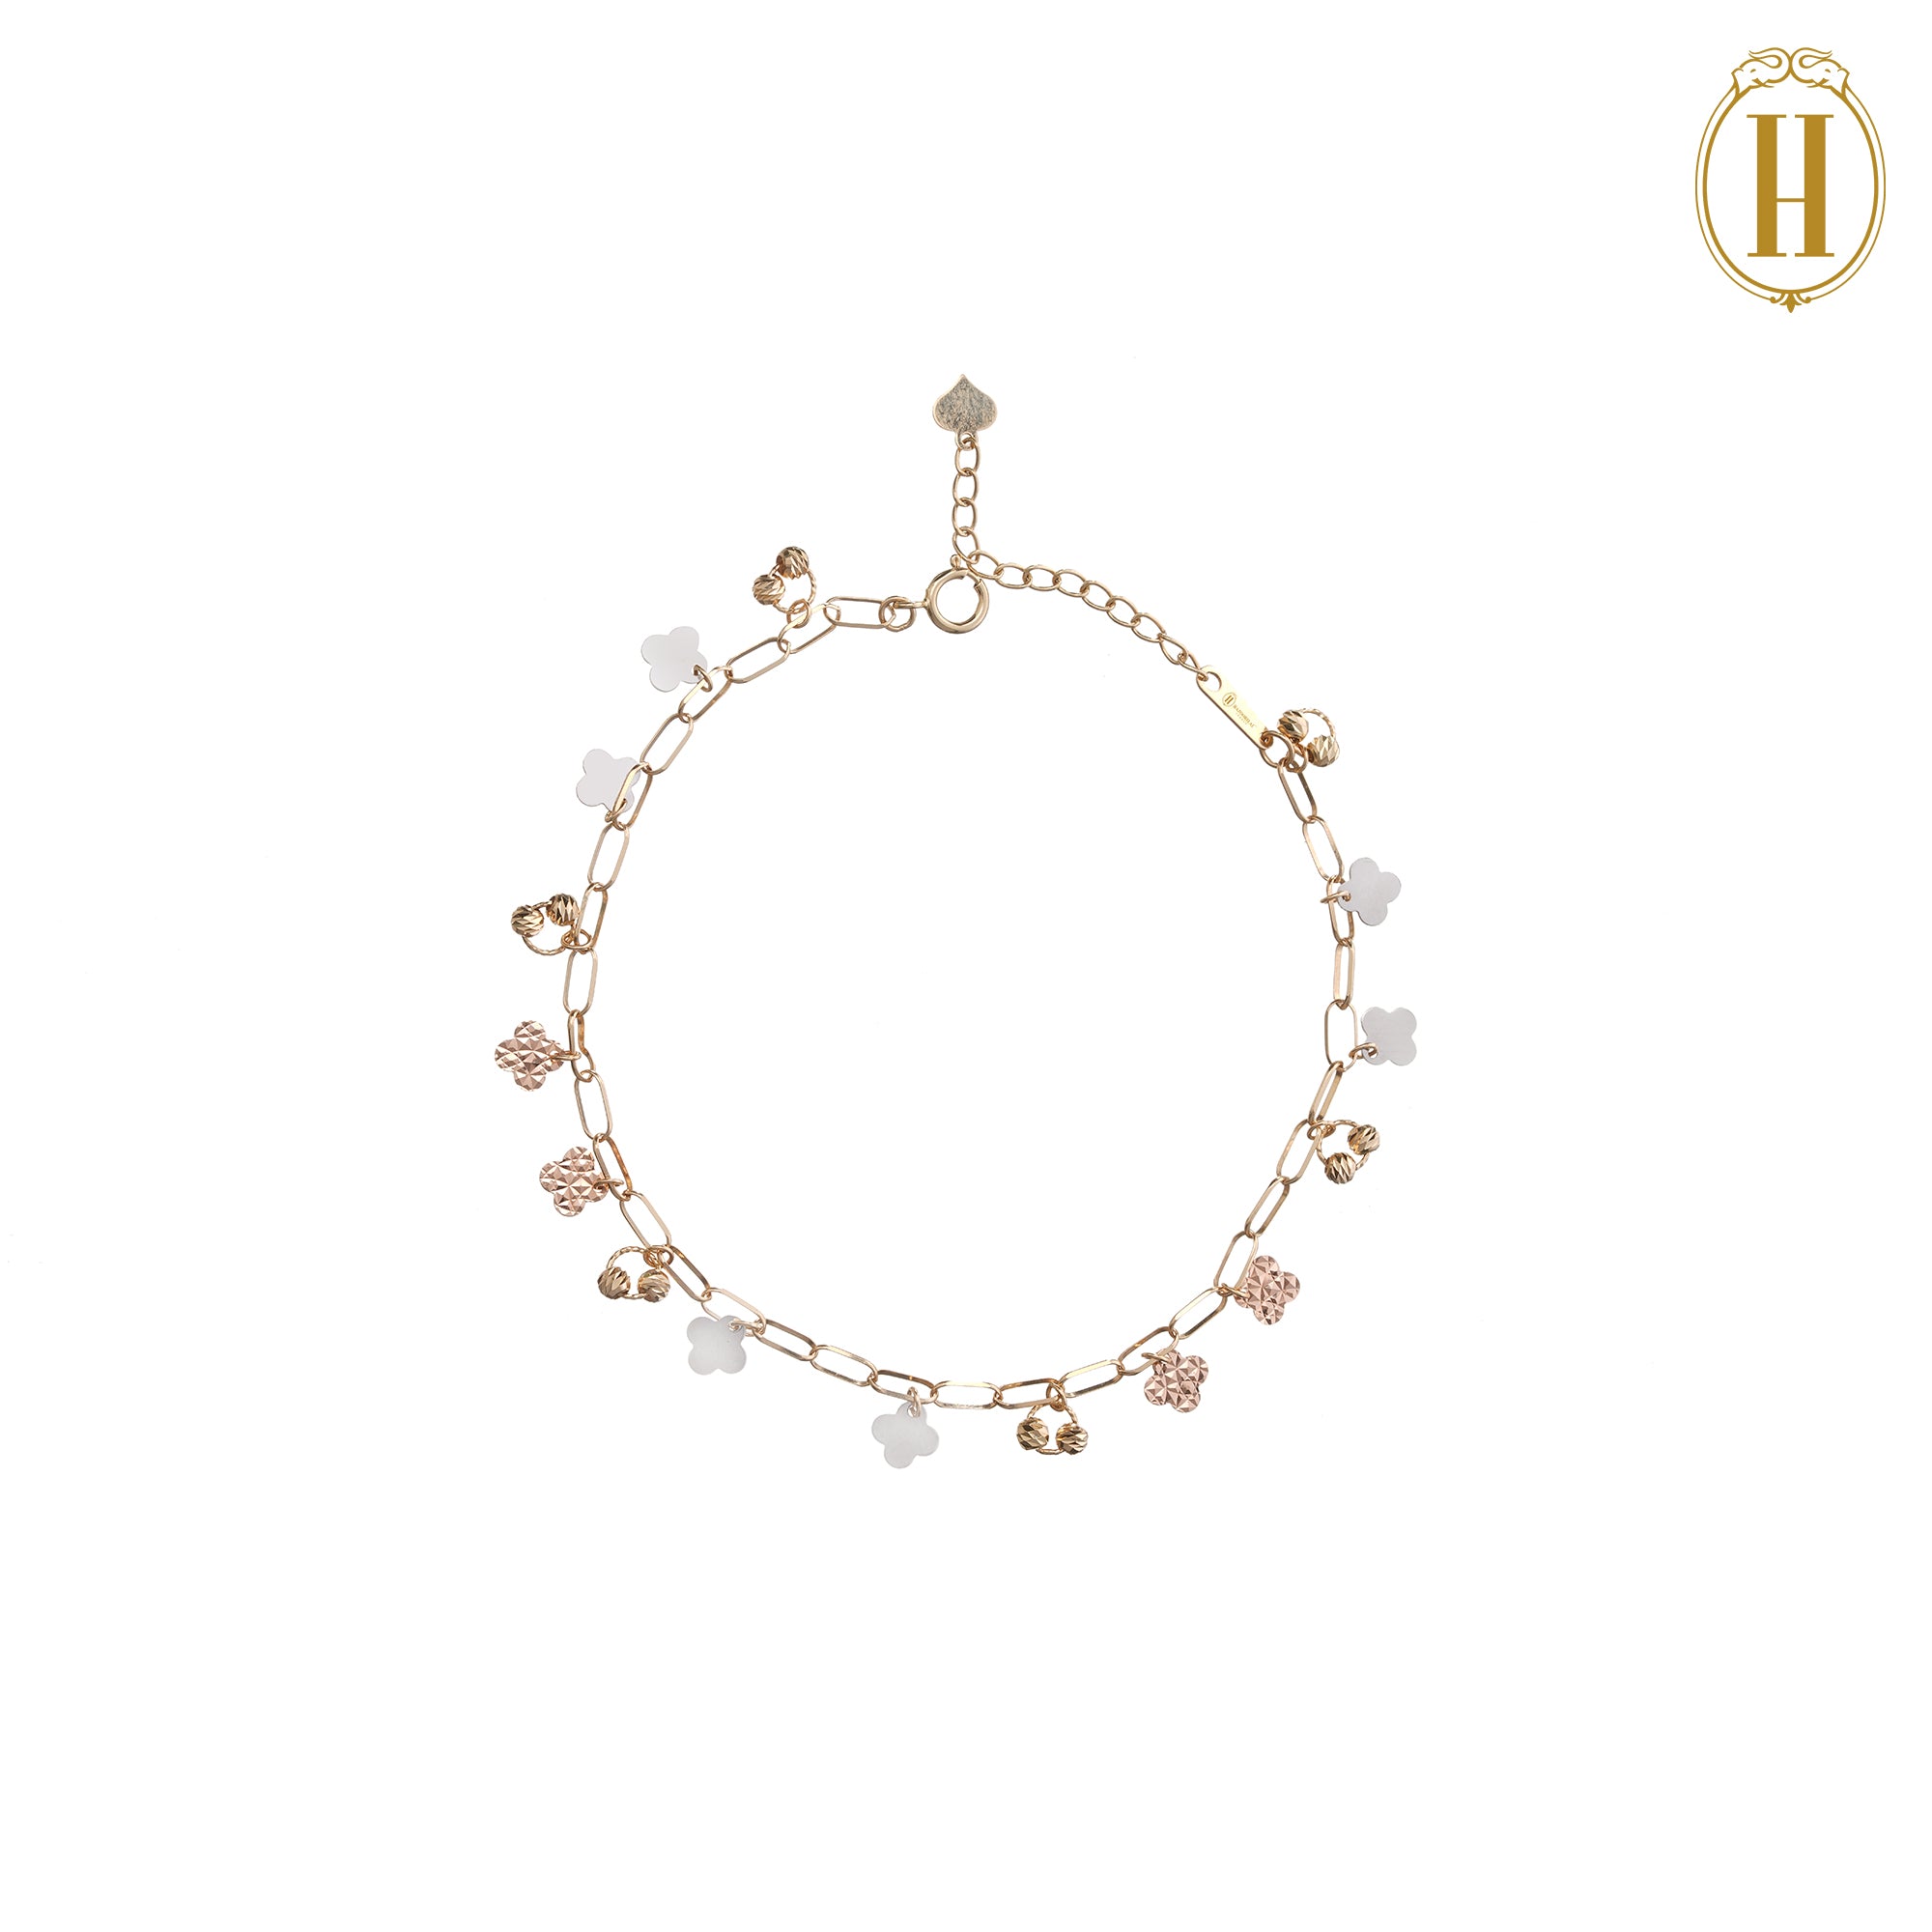 two tone gold bracelet with rose gold and white gold in circle